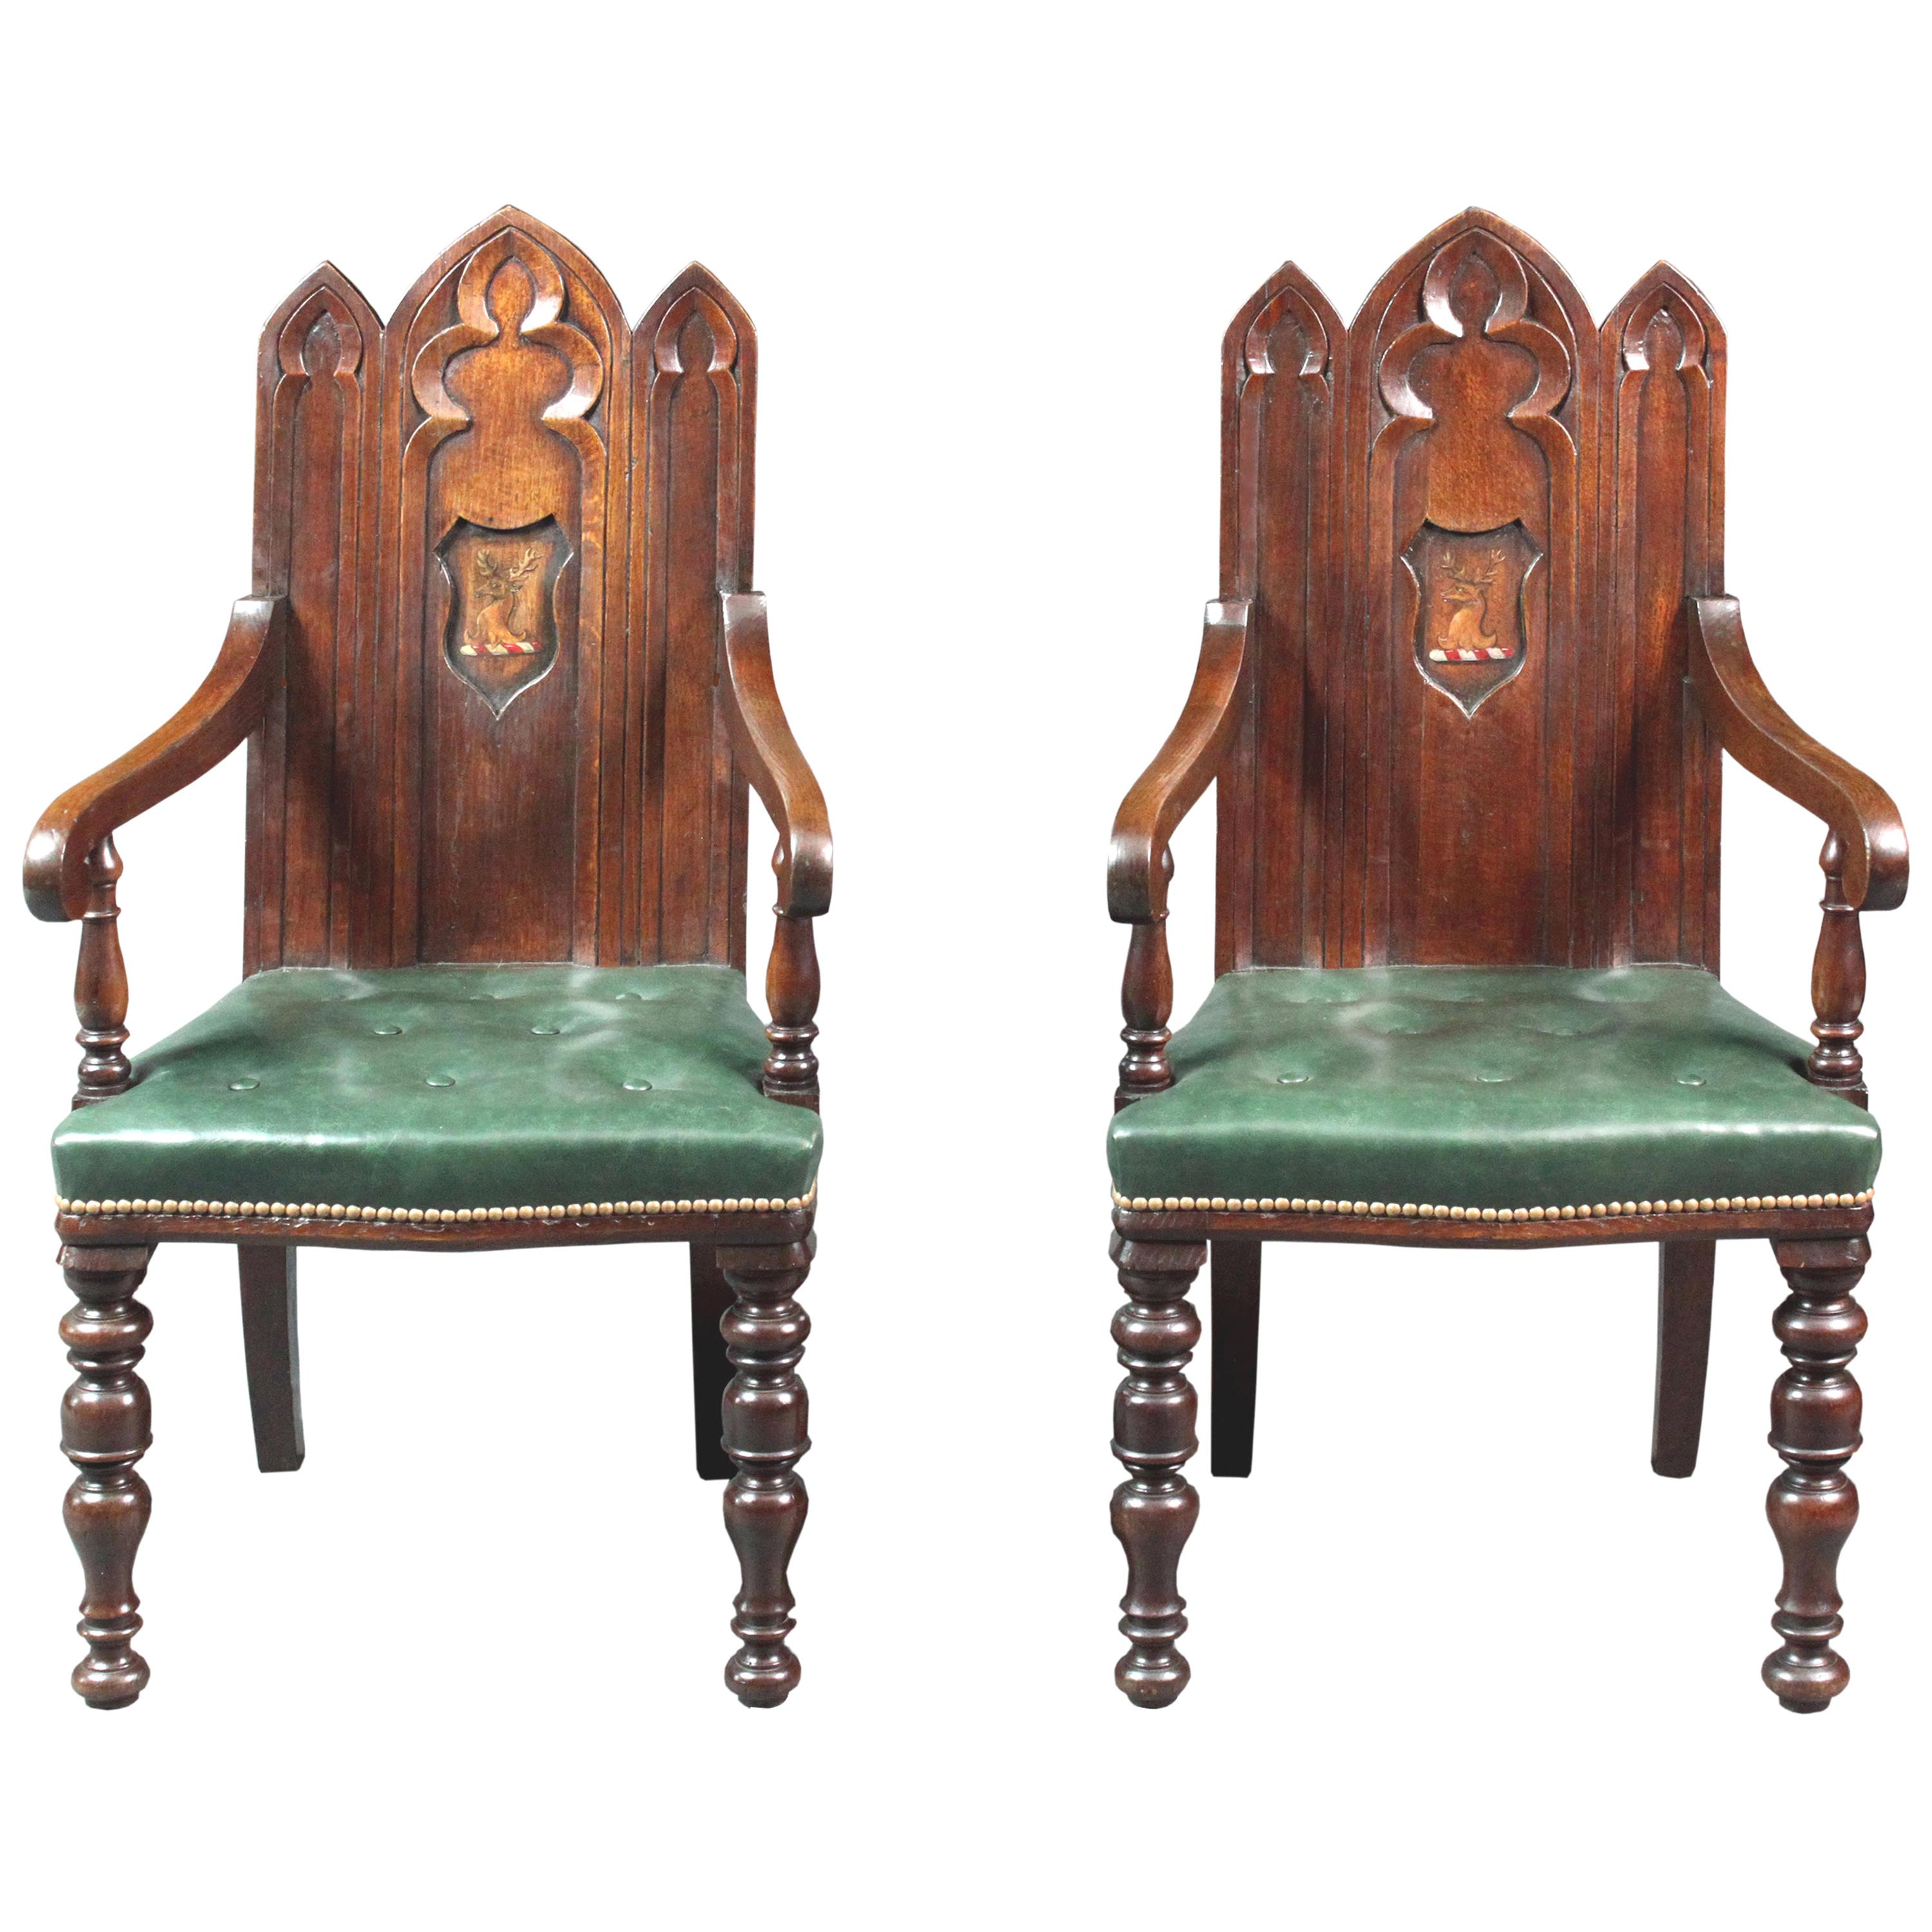 Pair of Armorial Gothic Oak Chairs with Arms For Sale